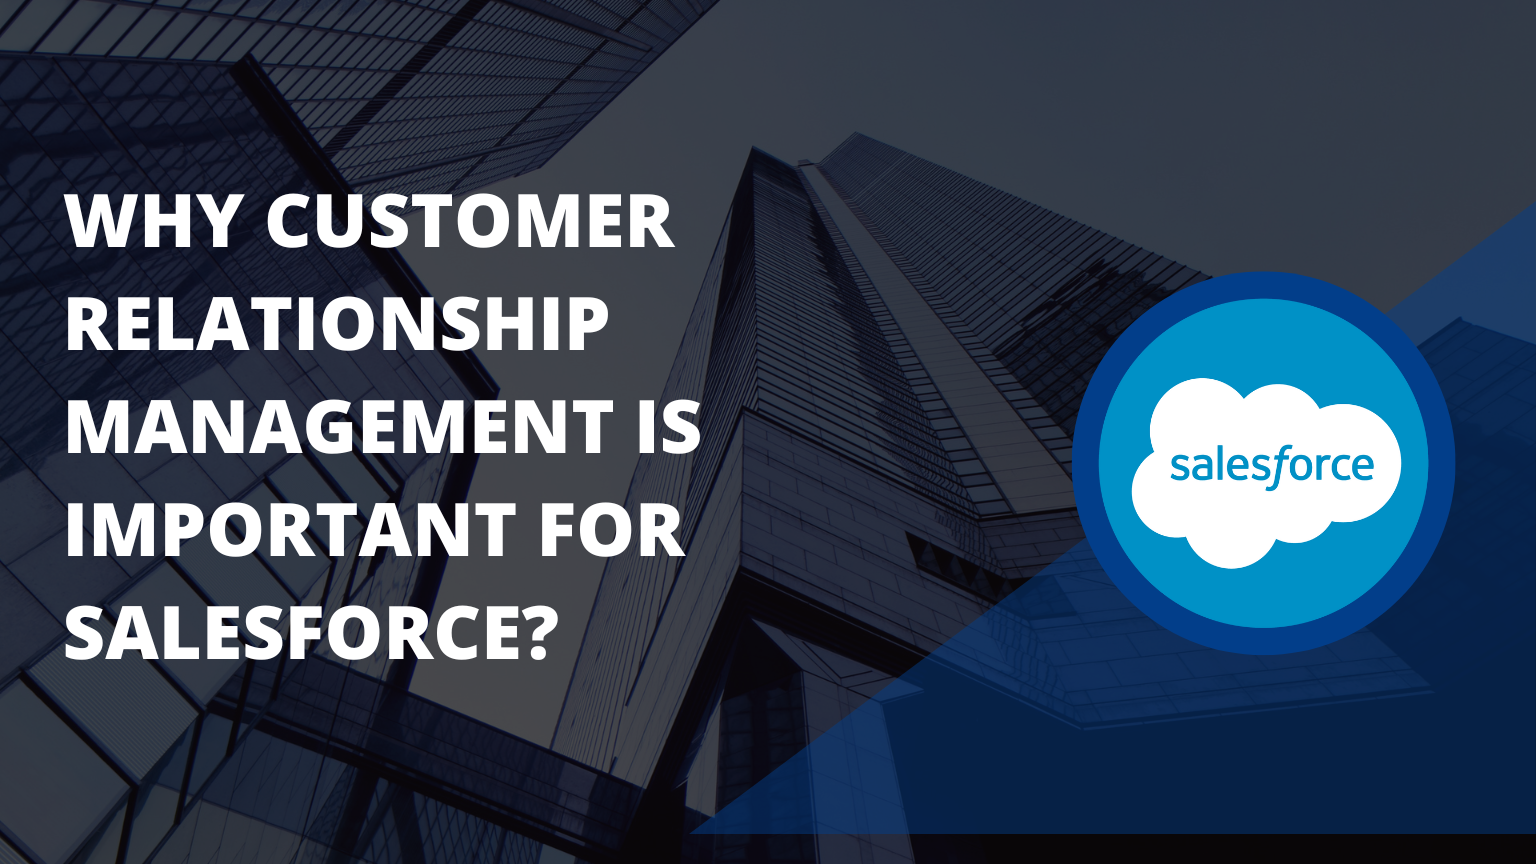 Why Customer Relationship Management is Important For Salesforce